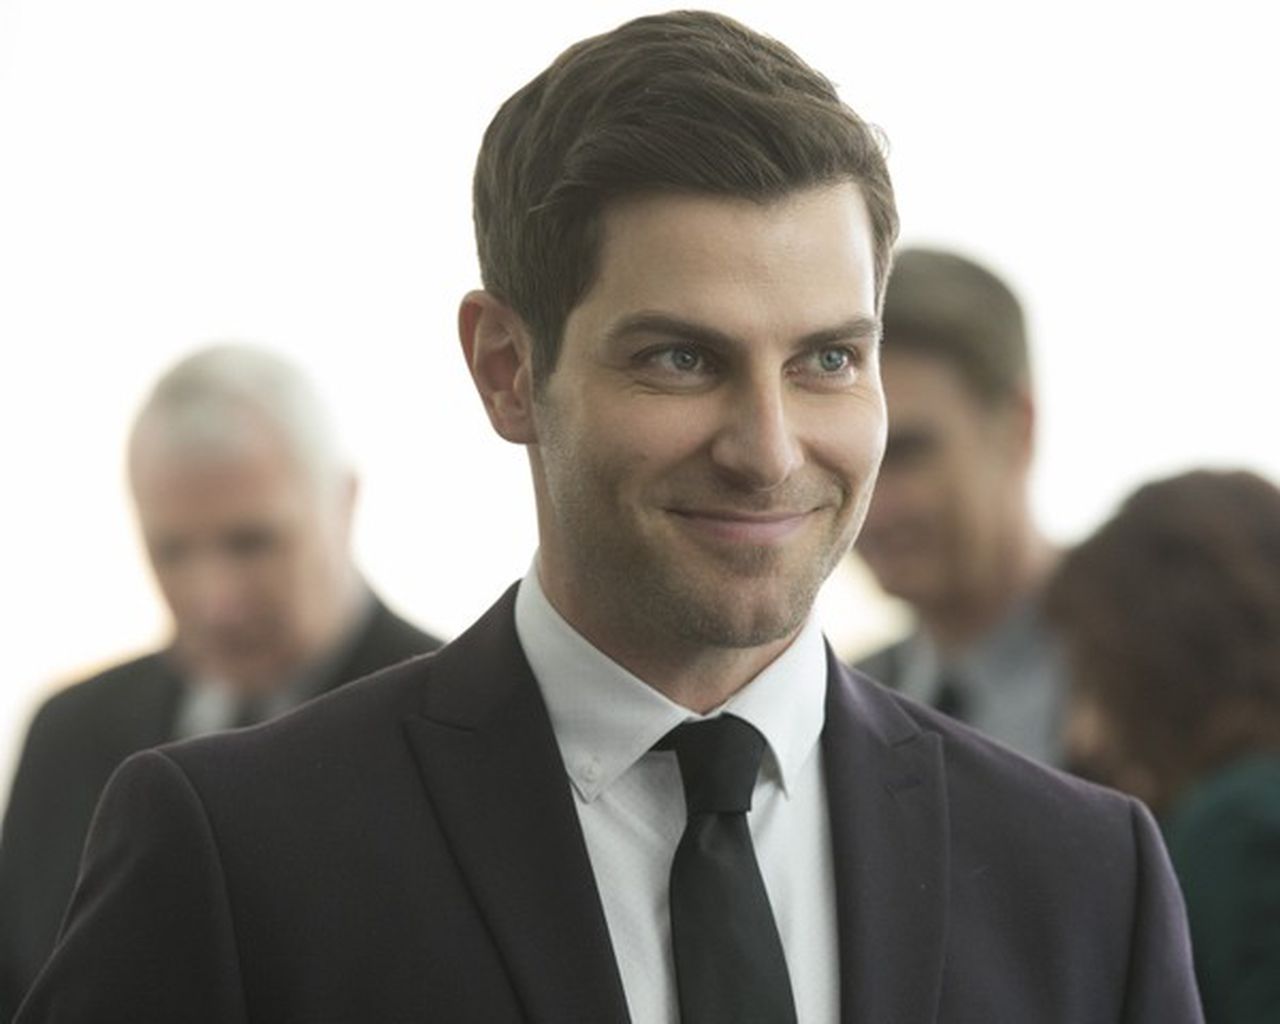 David Giuntoli on 'A Million Little Things' and 'Grimm': 'I miss Portland so much'